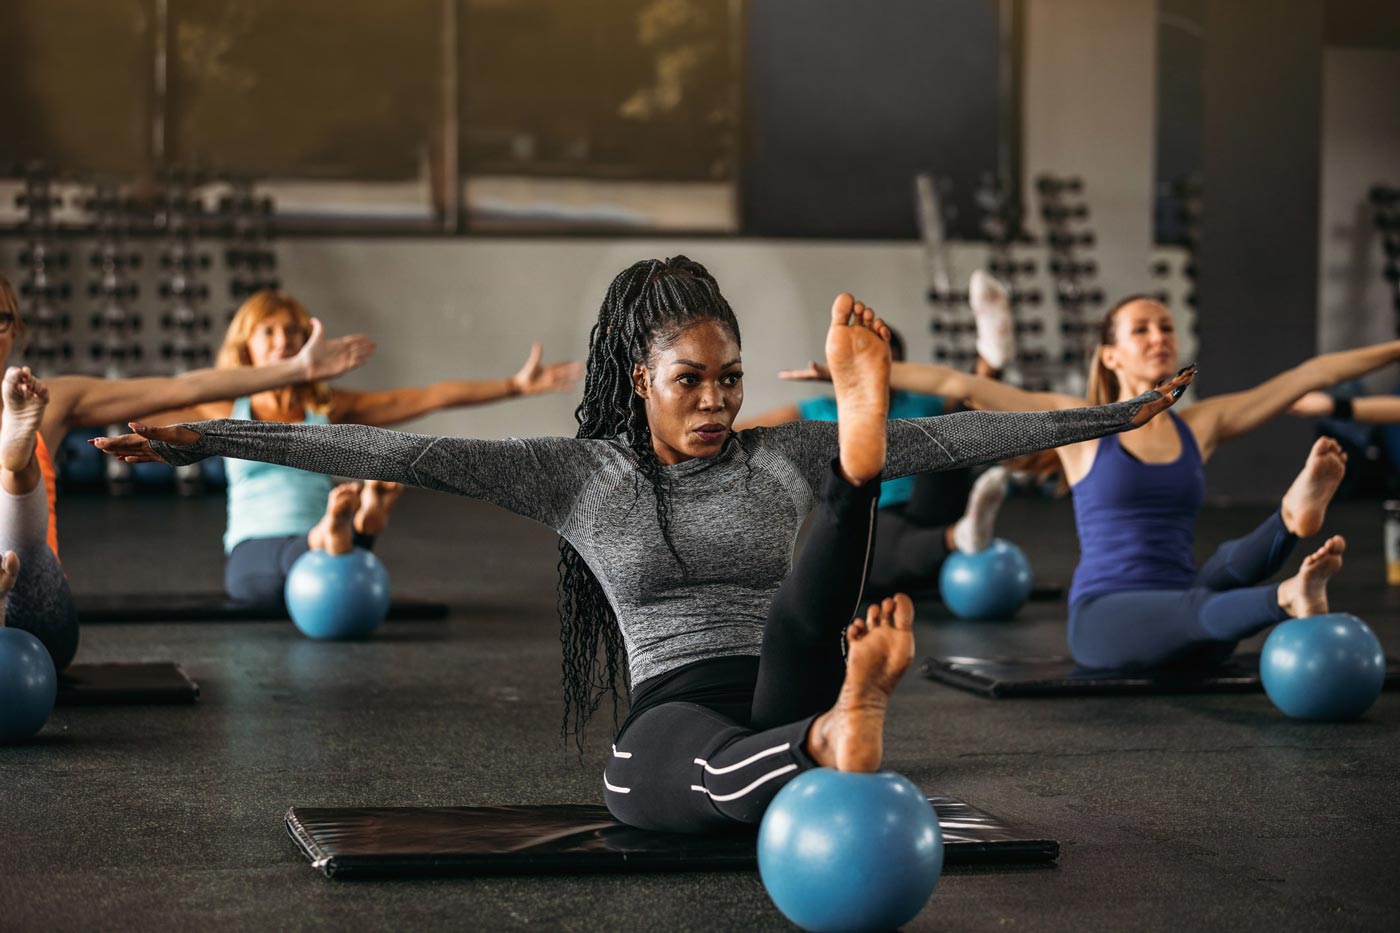 Work Out with Confidence: Get Fit Do’s and Don’ts